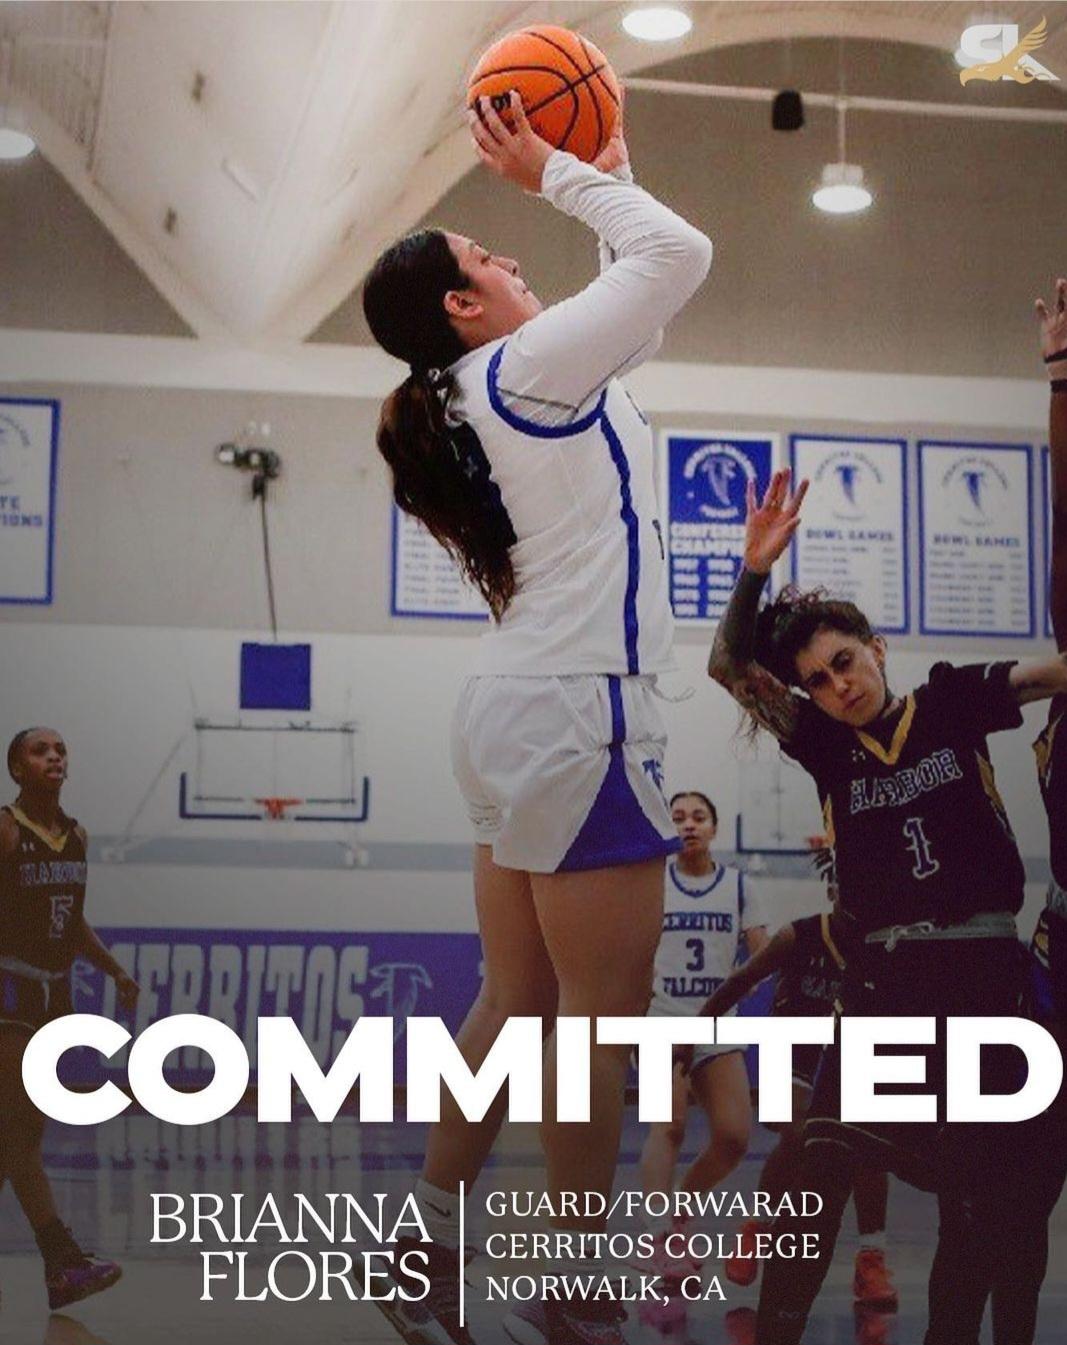 Brianna Flores commits to the University of Saint Katherine